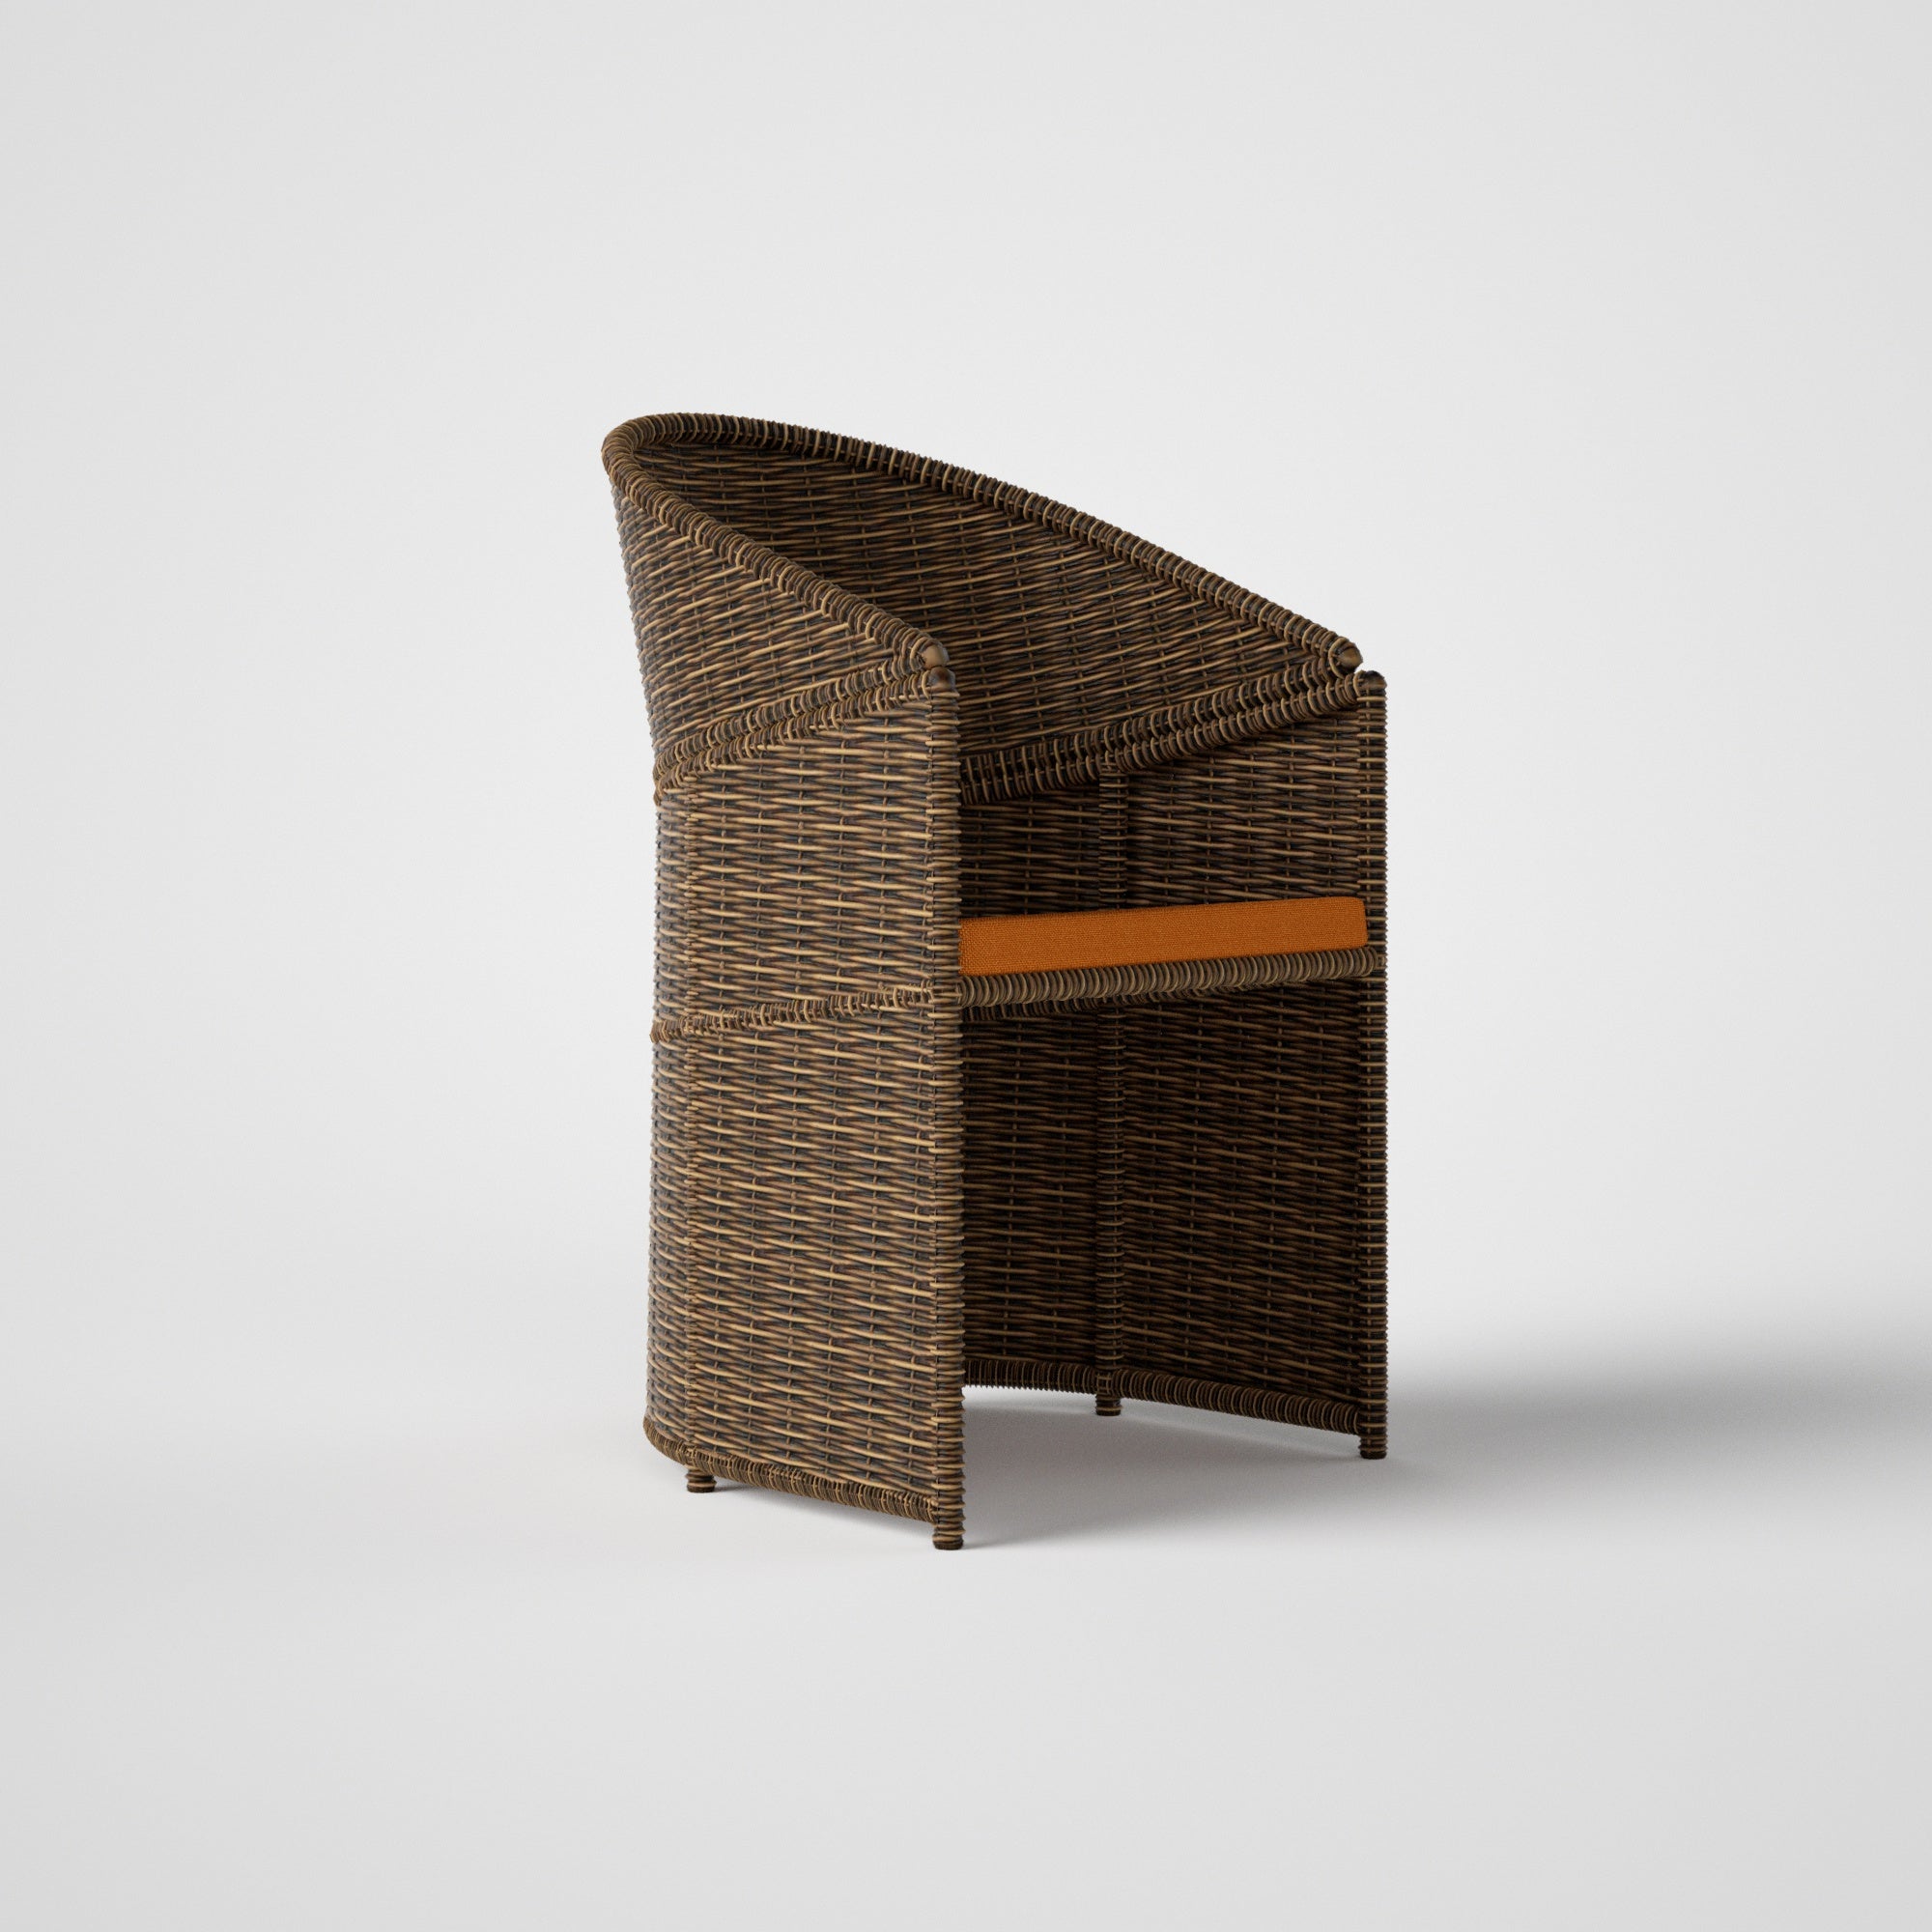 Napoli Dining chair (wicker)